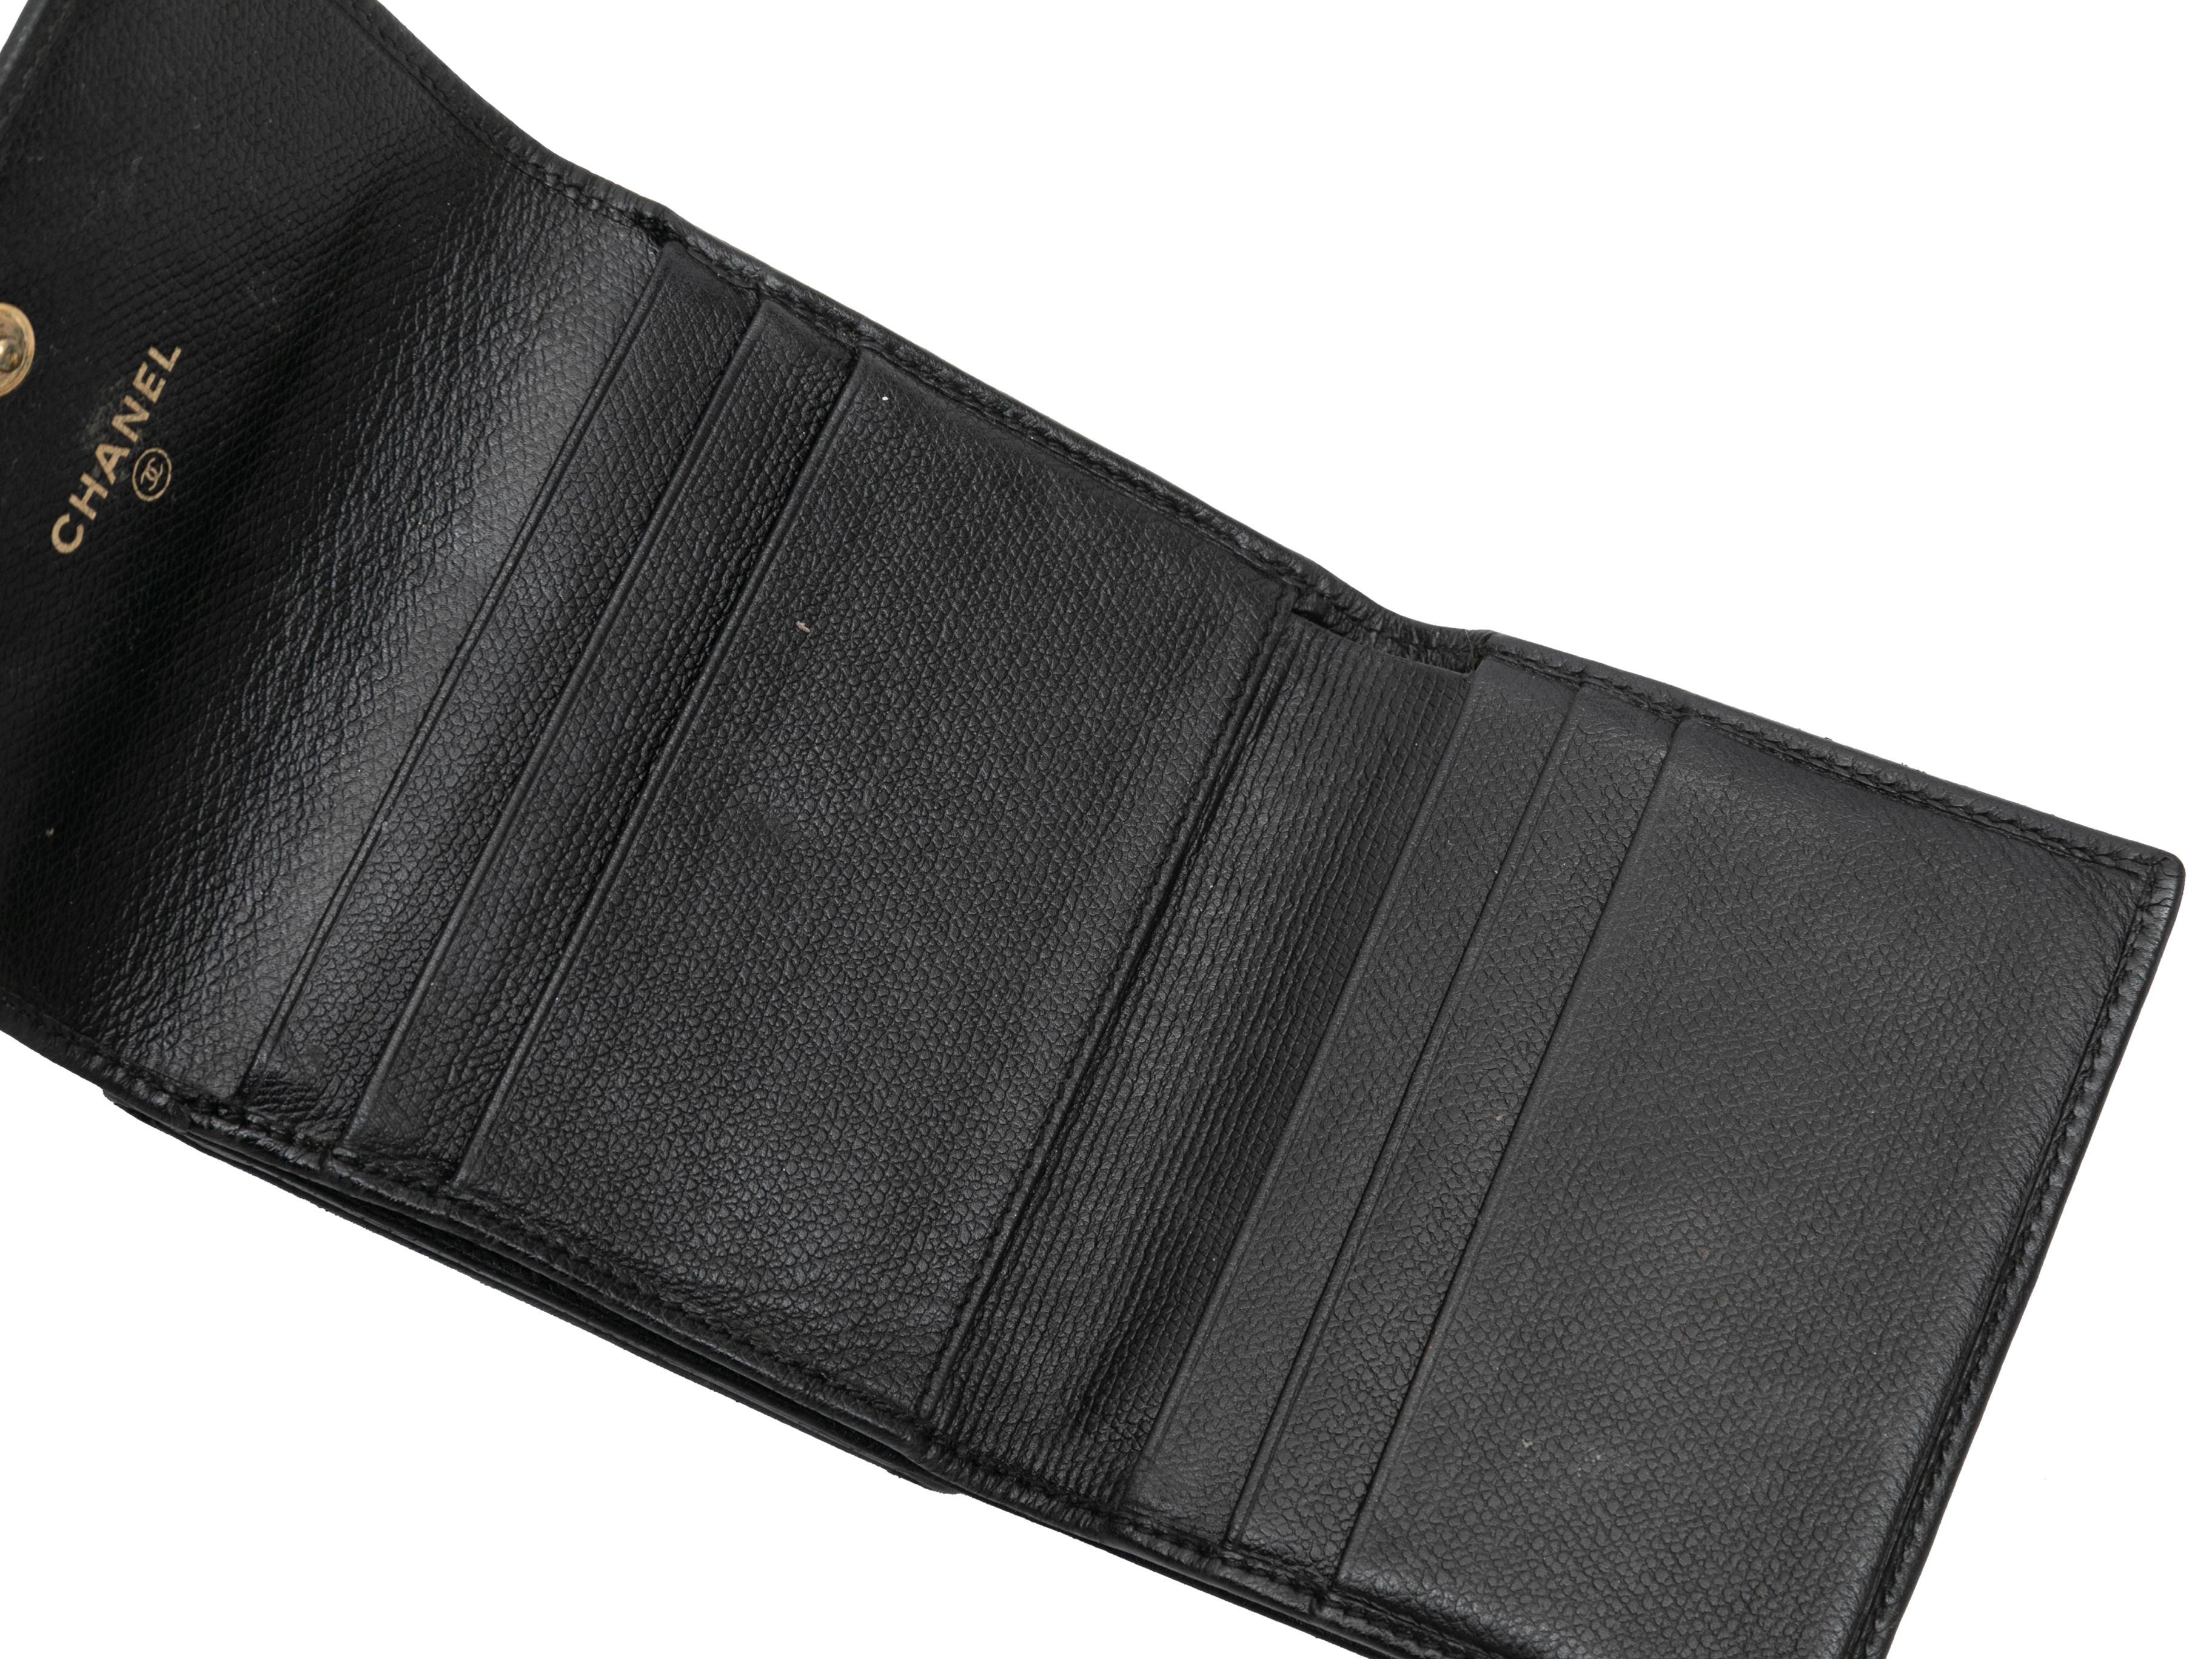 Vintage Black Chanel Leather Wallet In Fair Condition For Sale In New York, NY